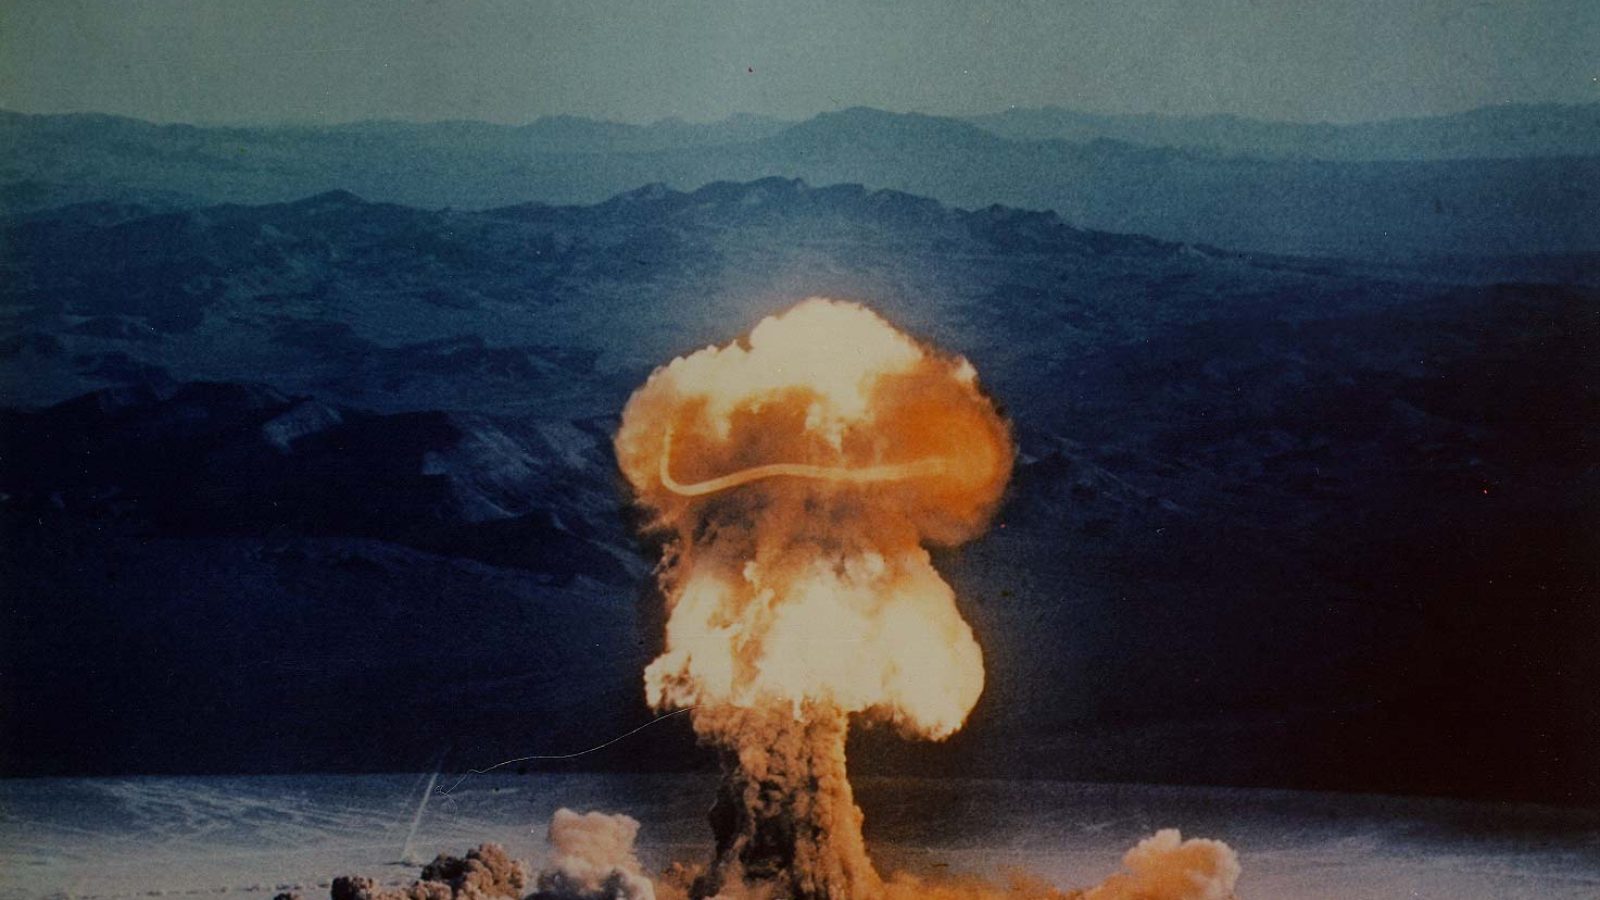 nuclear weapons test in Nevada